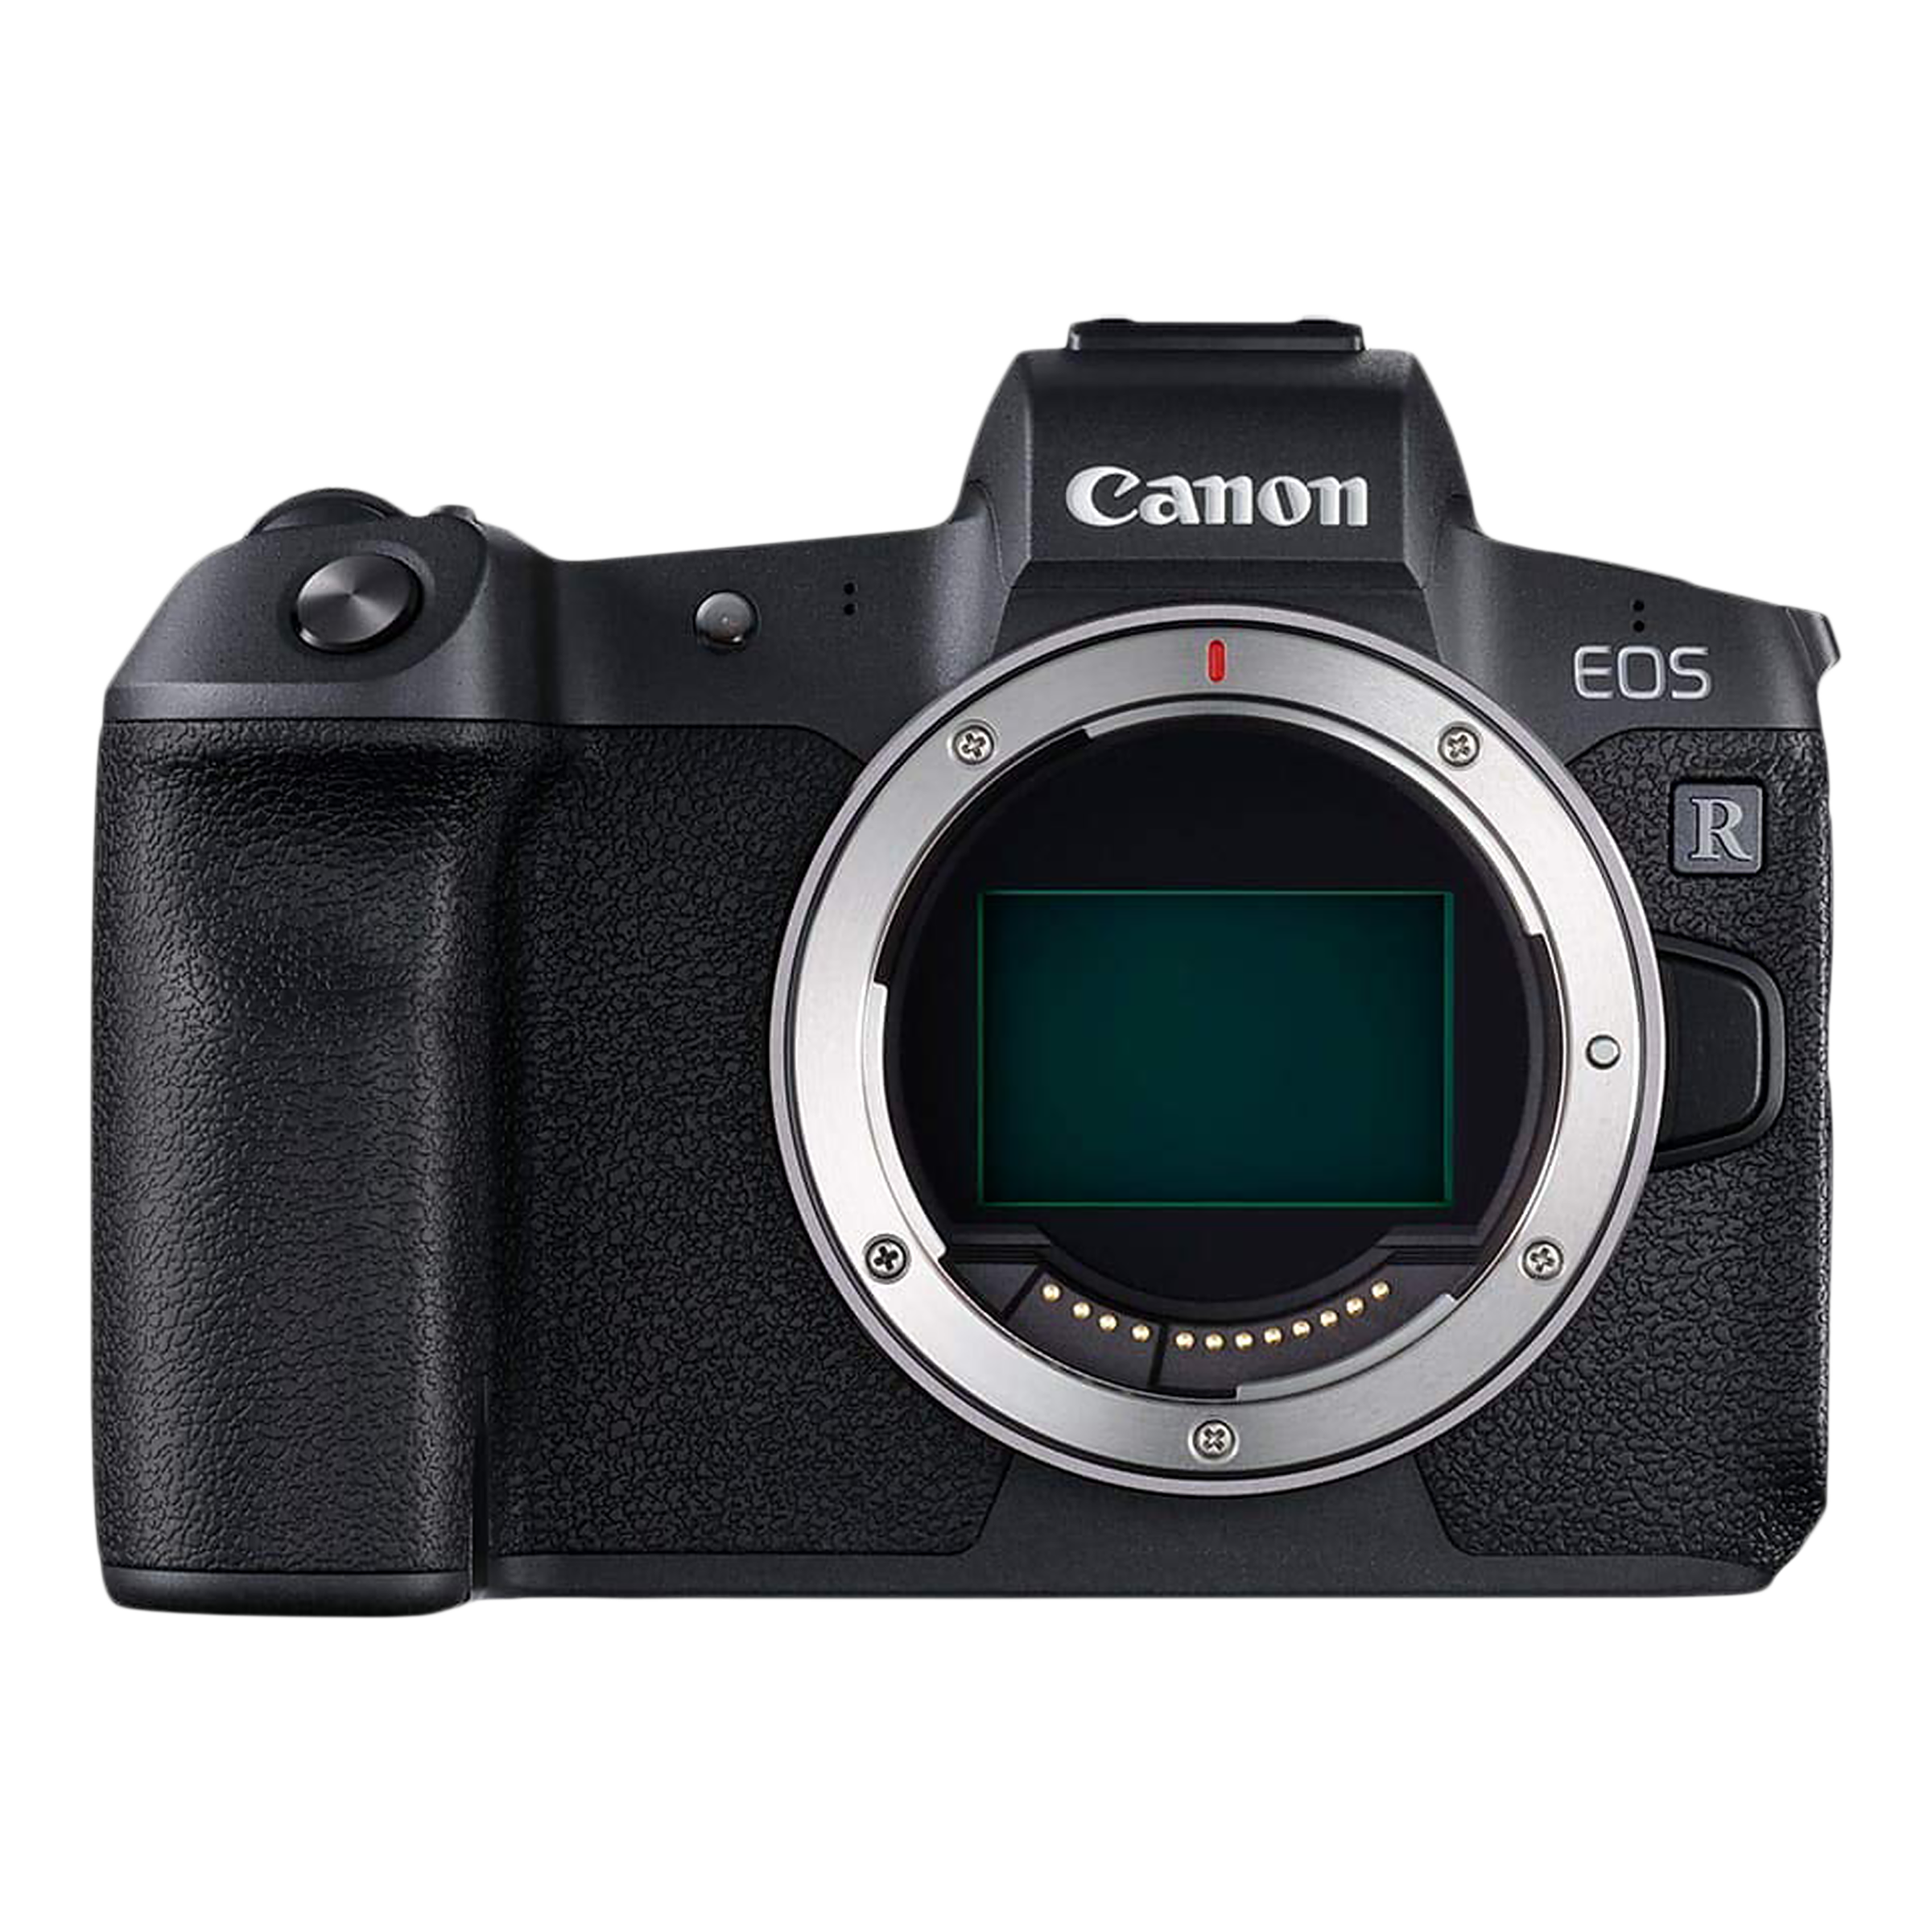 Canon EOS R 30.3MP Mirrorless Camera (Body Only, 36 x 24 mm Sensor, Vari-Angle Touch Screen LCD)